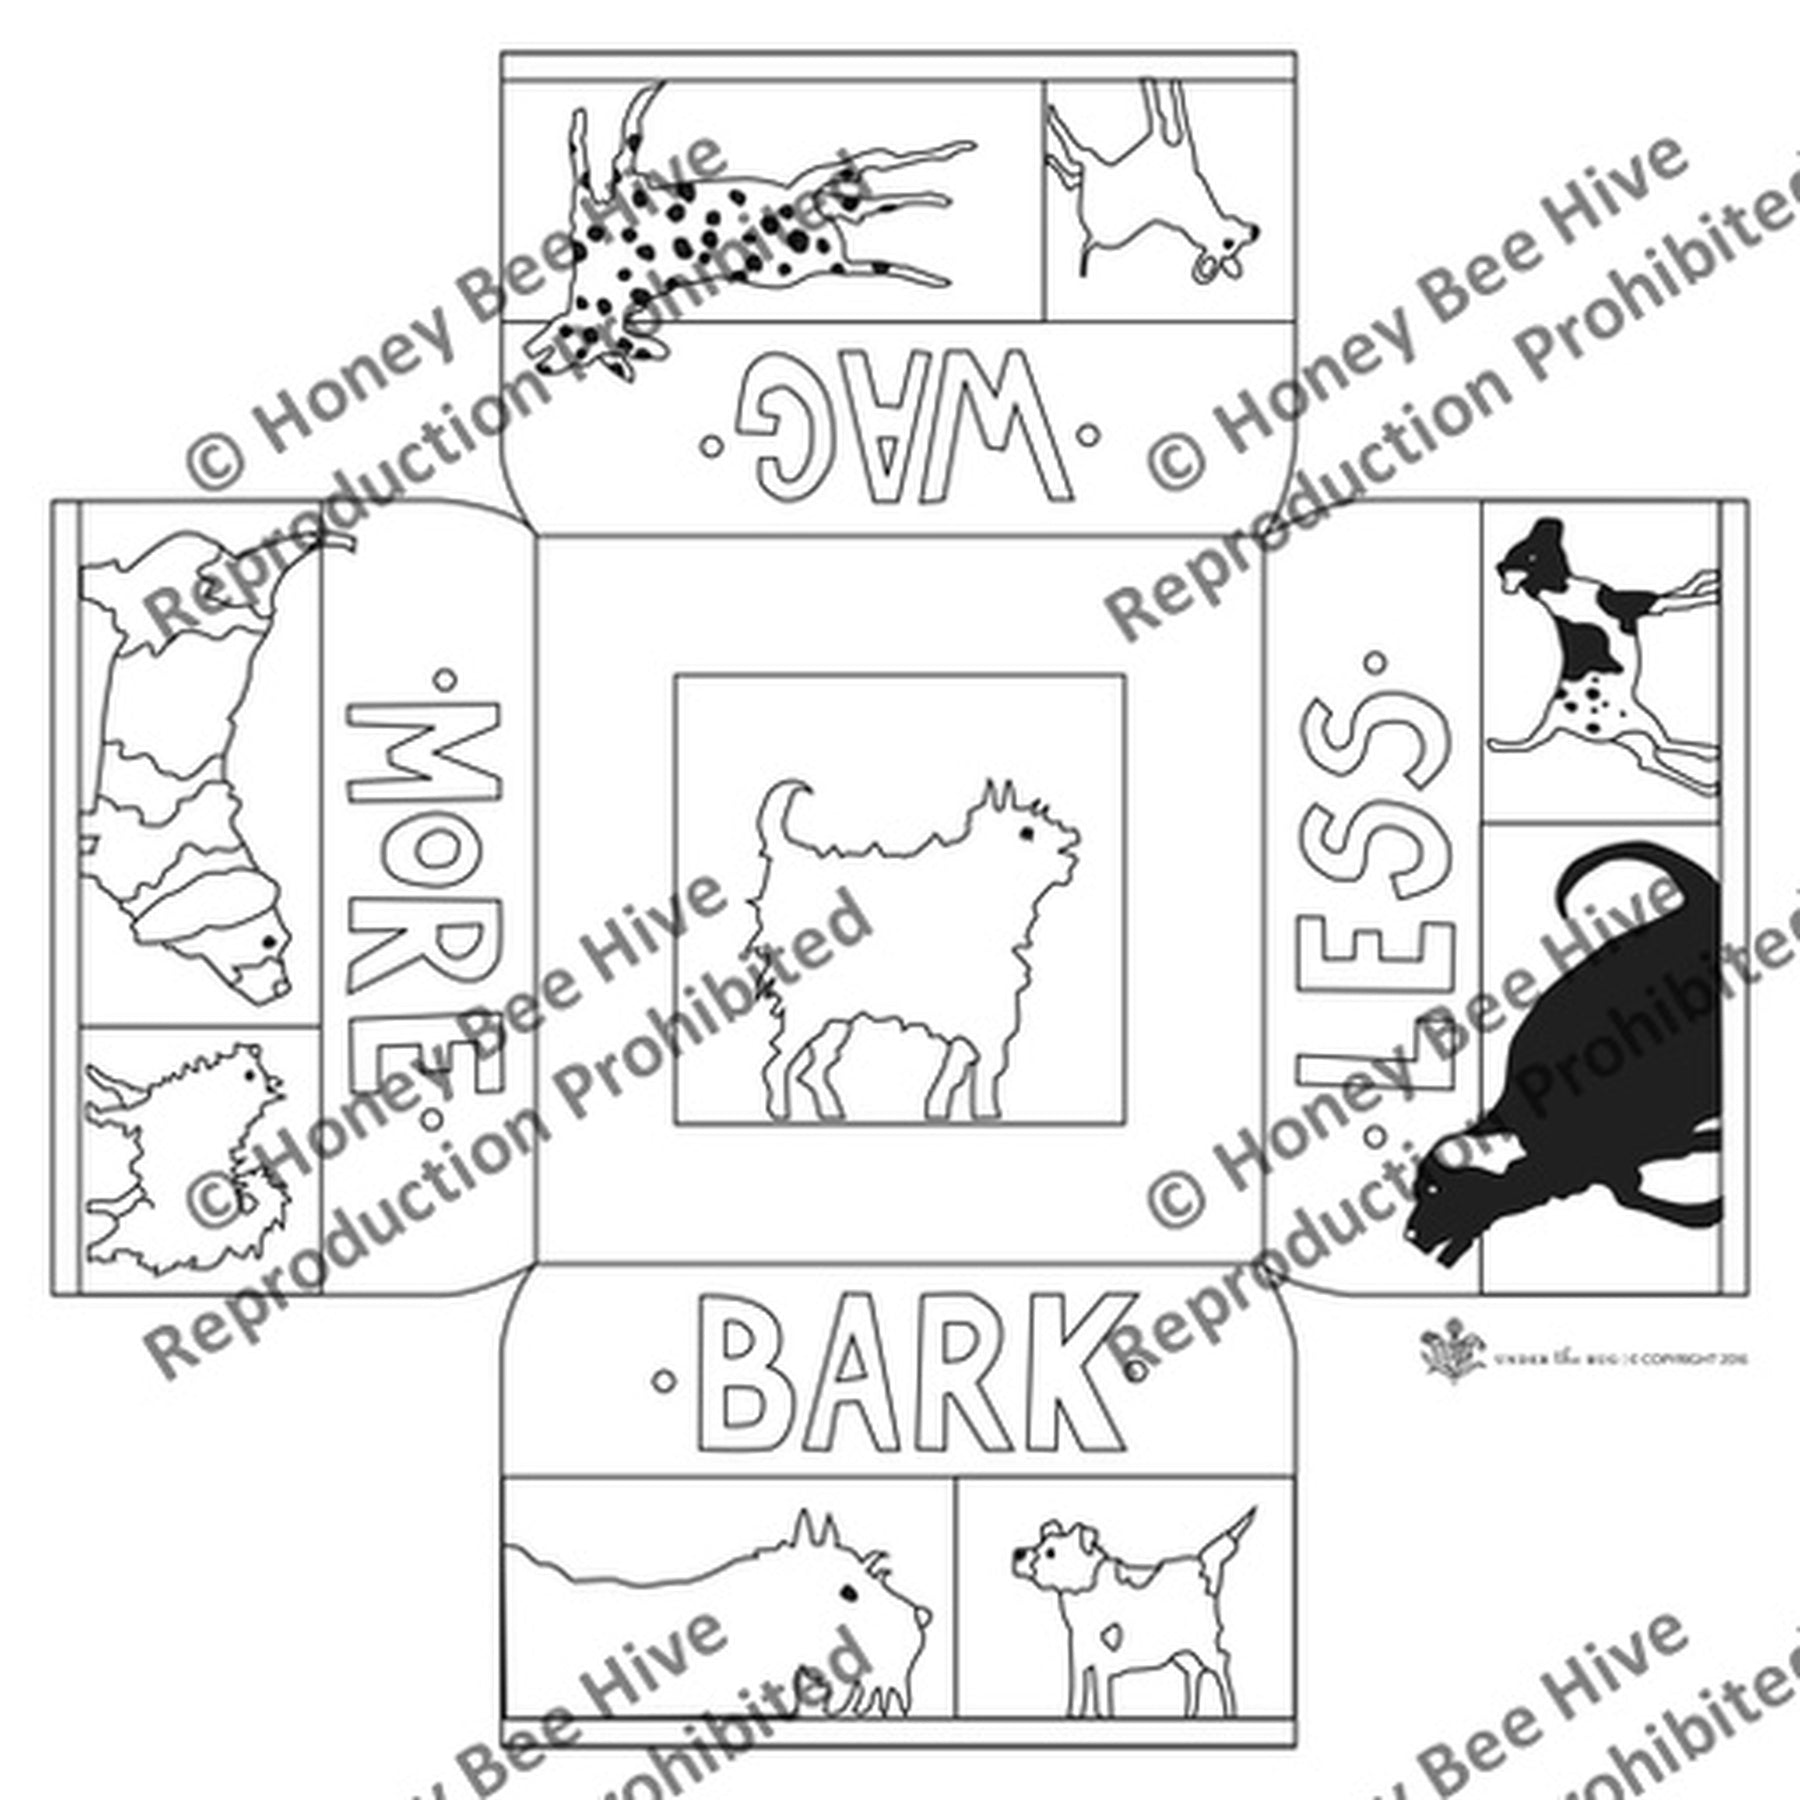 Bark Less Wag More, Full Dog Center - Square Footstool Pattern, rug hooking pattern